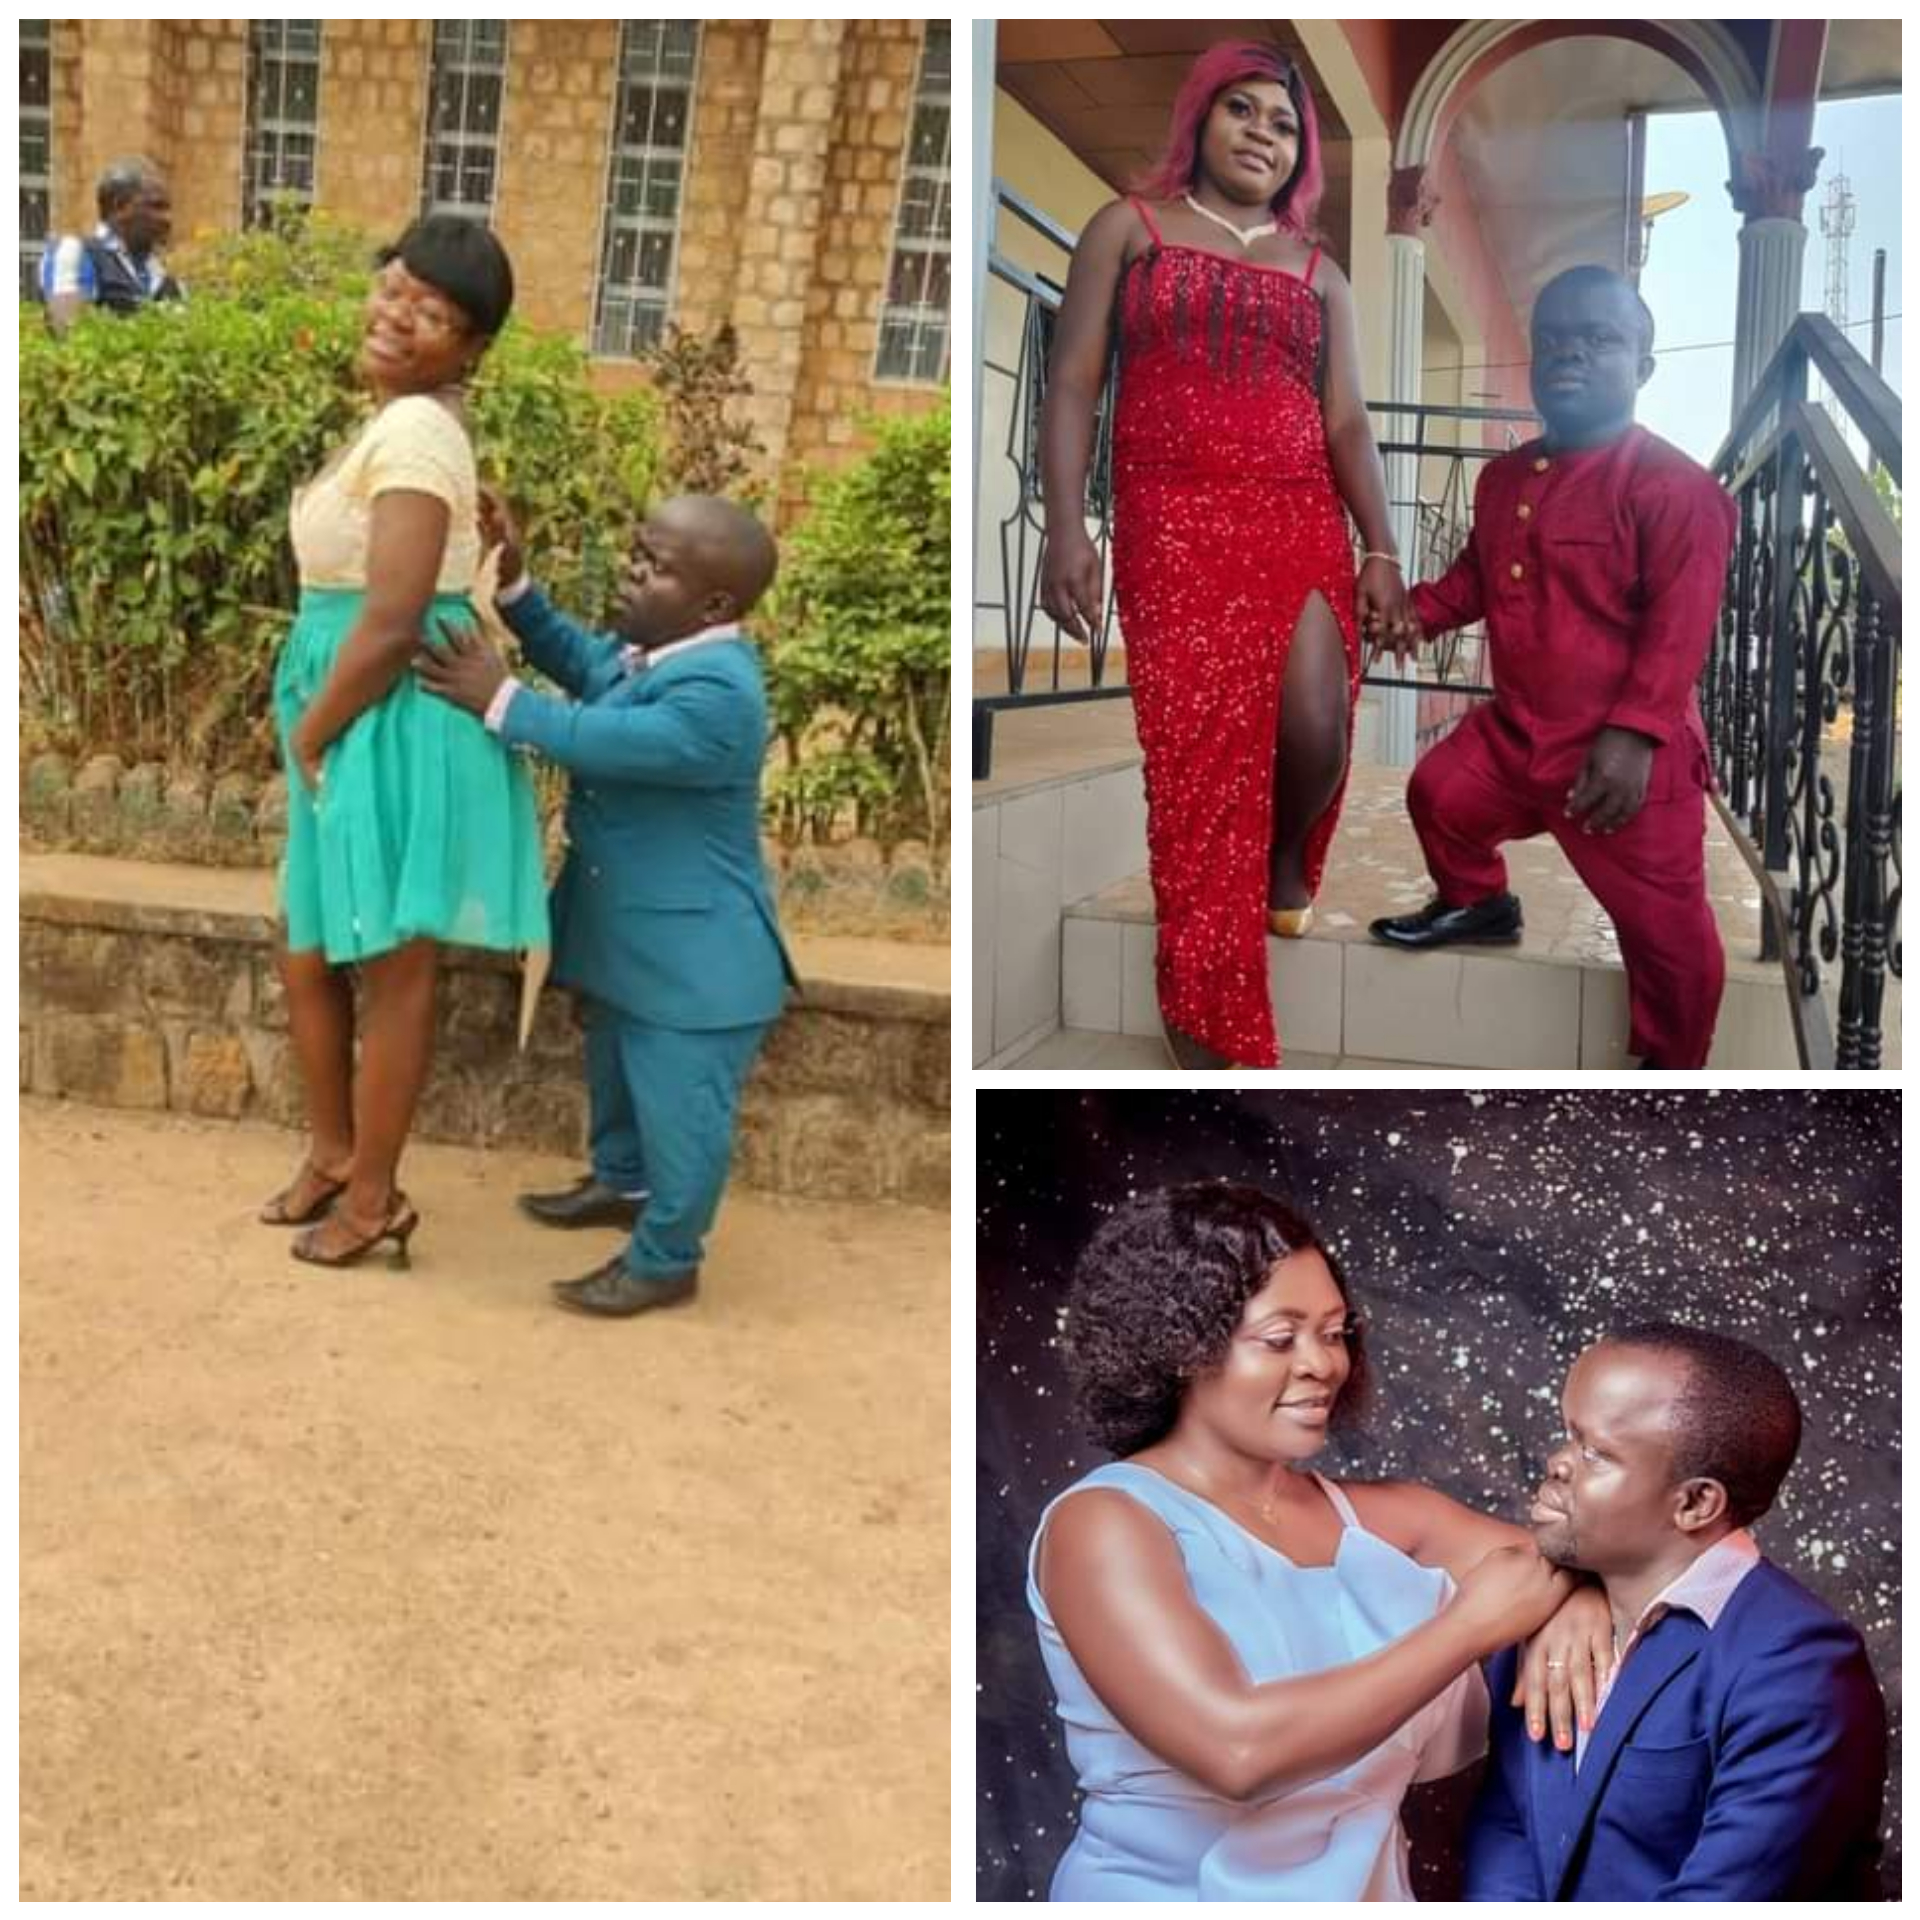 Short teacher who was rejected by women due to his height, kisses his wife in new photos